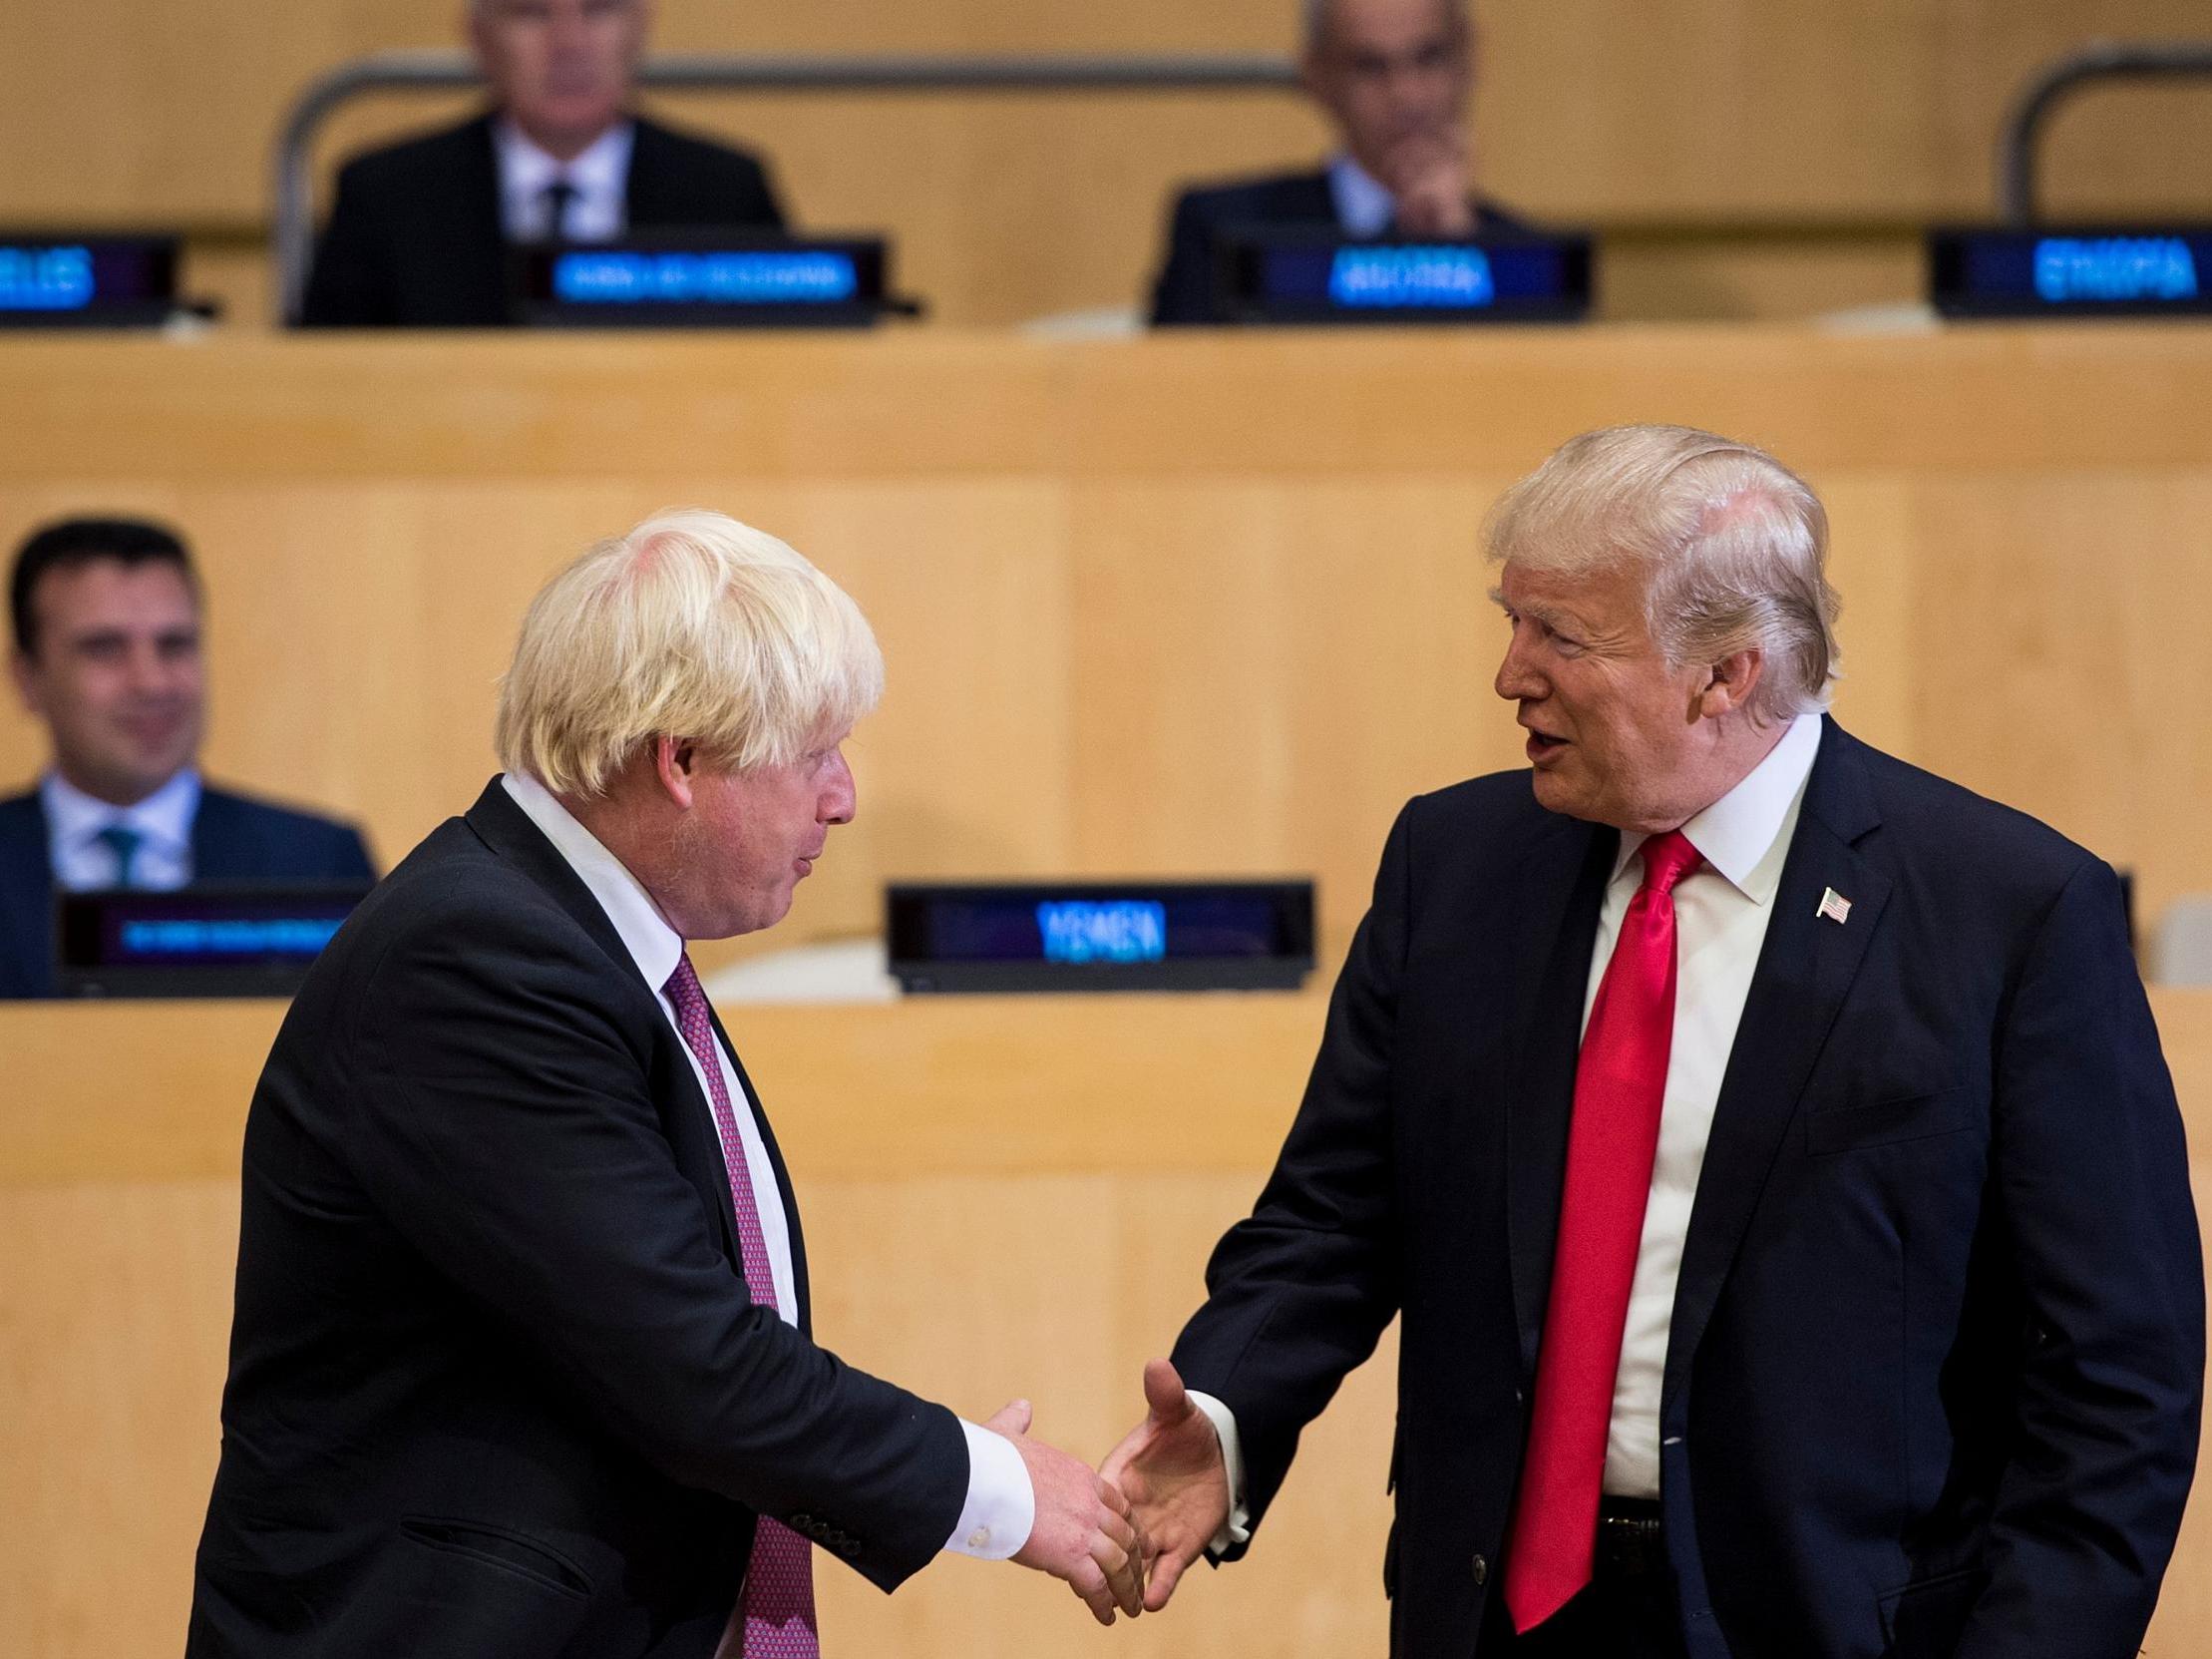 Ex-foreign secretary Boris Johnson meets with Donald Trump at UN headquarters in New York in September 2017